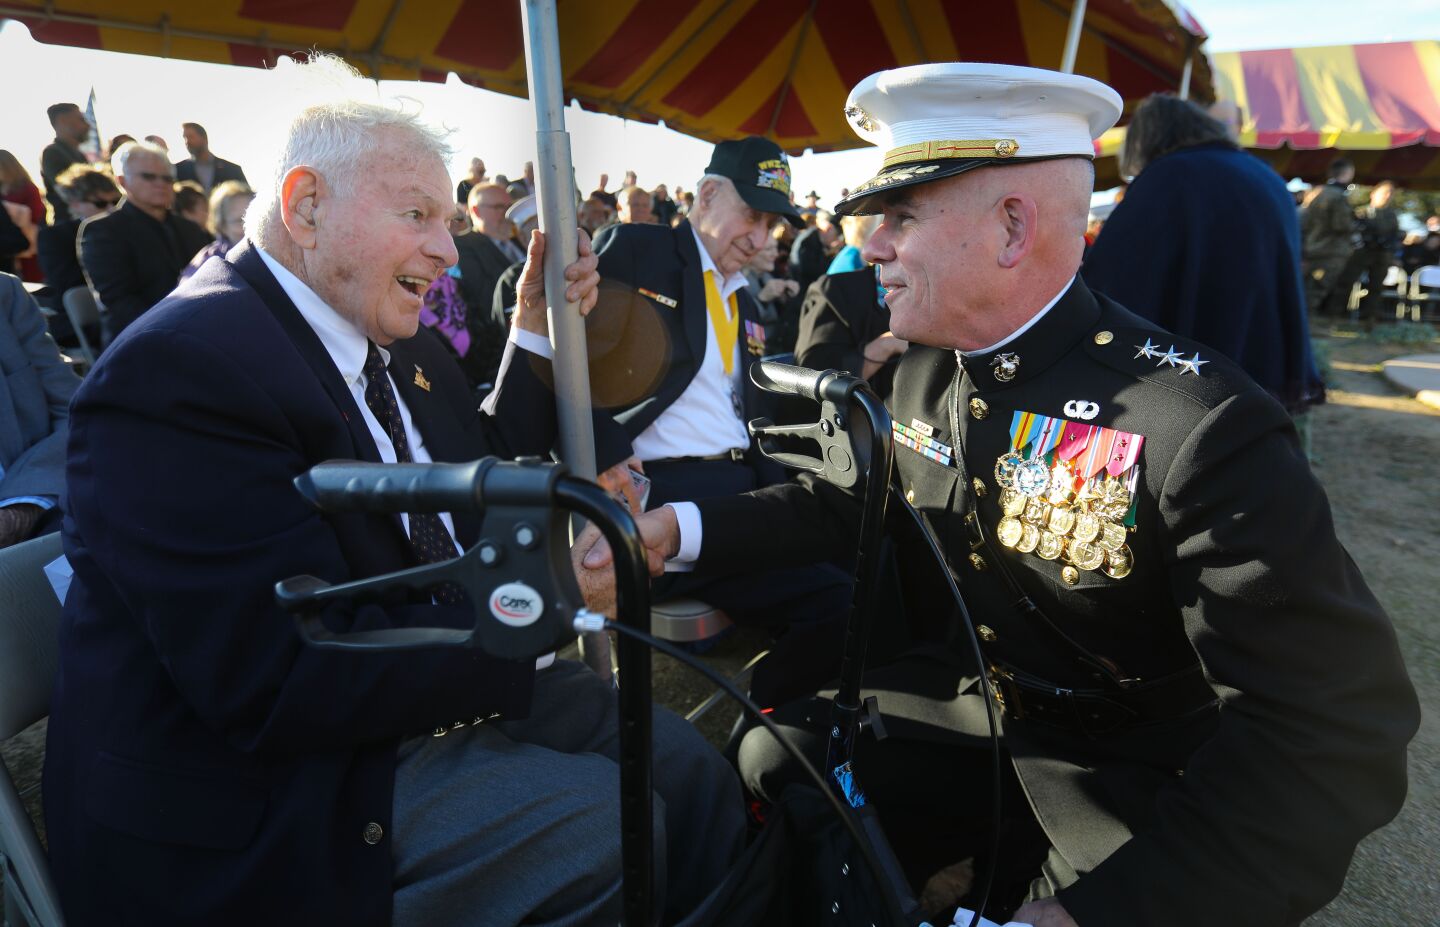 World War II Marine Corps veteran of the Battle of Iwo Jima, Carlo Romano, 95, left, of Fallbrook, talks with Lt. General Joseph Osterman, right, commanding general of the I Marine Expeditionary Force, before the commemoration ceremony for the 75th anniversary of the battle began at Camp Pendleton, February 15. This is the last time the Iwo Jima Commemorative Committee is planning to hold a formal West Coast gathering of veterans of the battle.